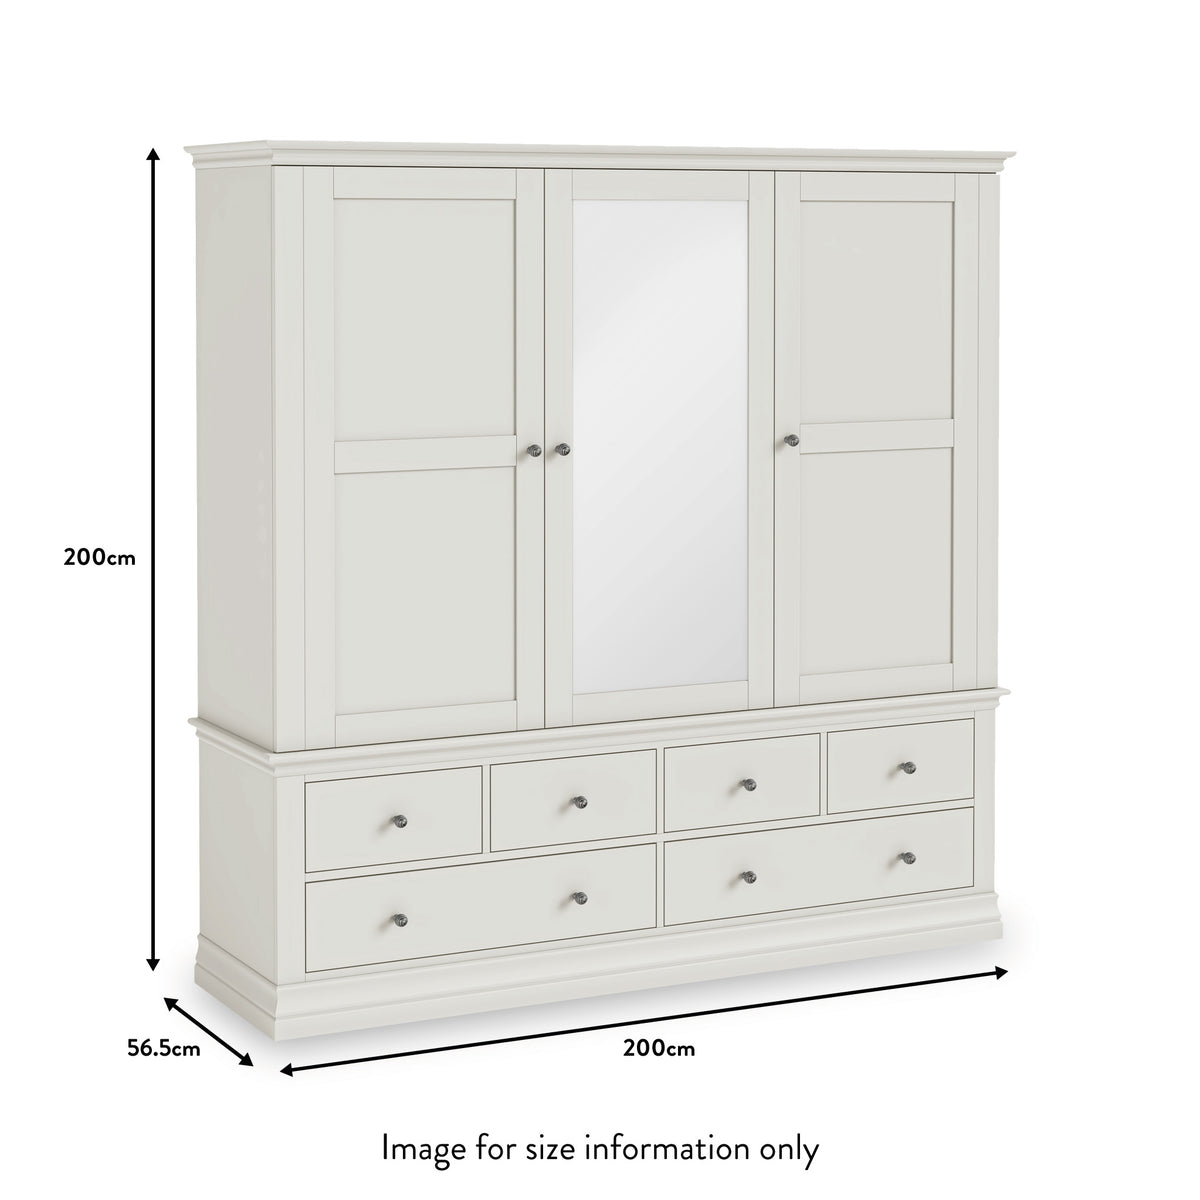 Porter Grey Triple Wardrobe with 6 Drawers dimensions